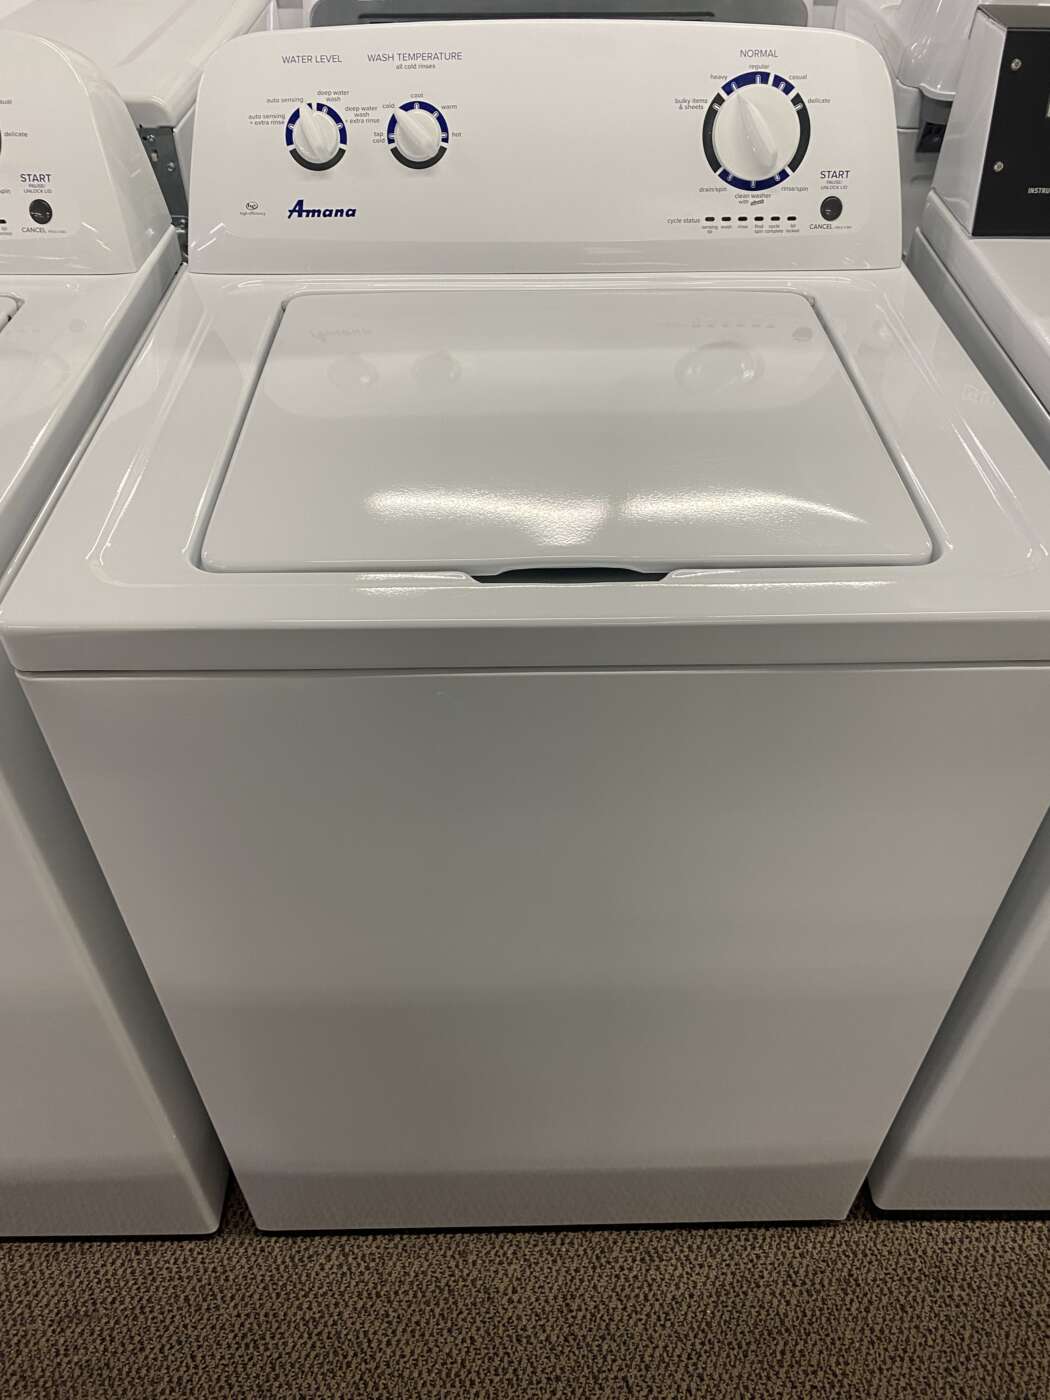 Reconditioned AMANA 3.5 Cu. Ft. Top Load Washer